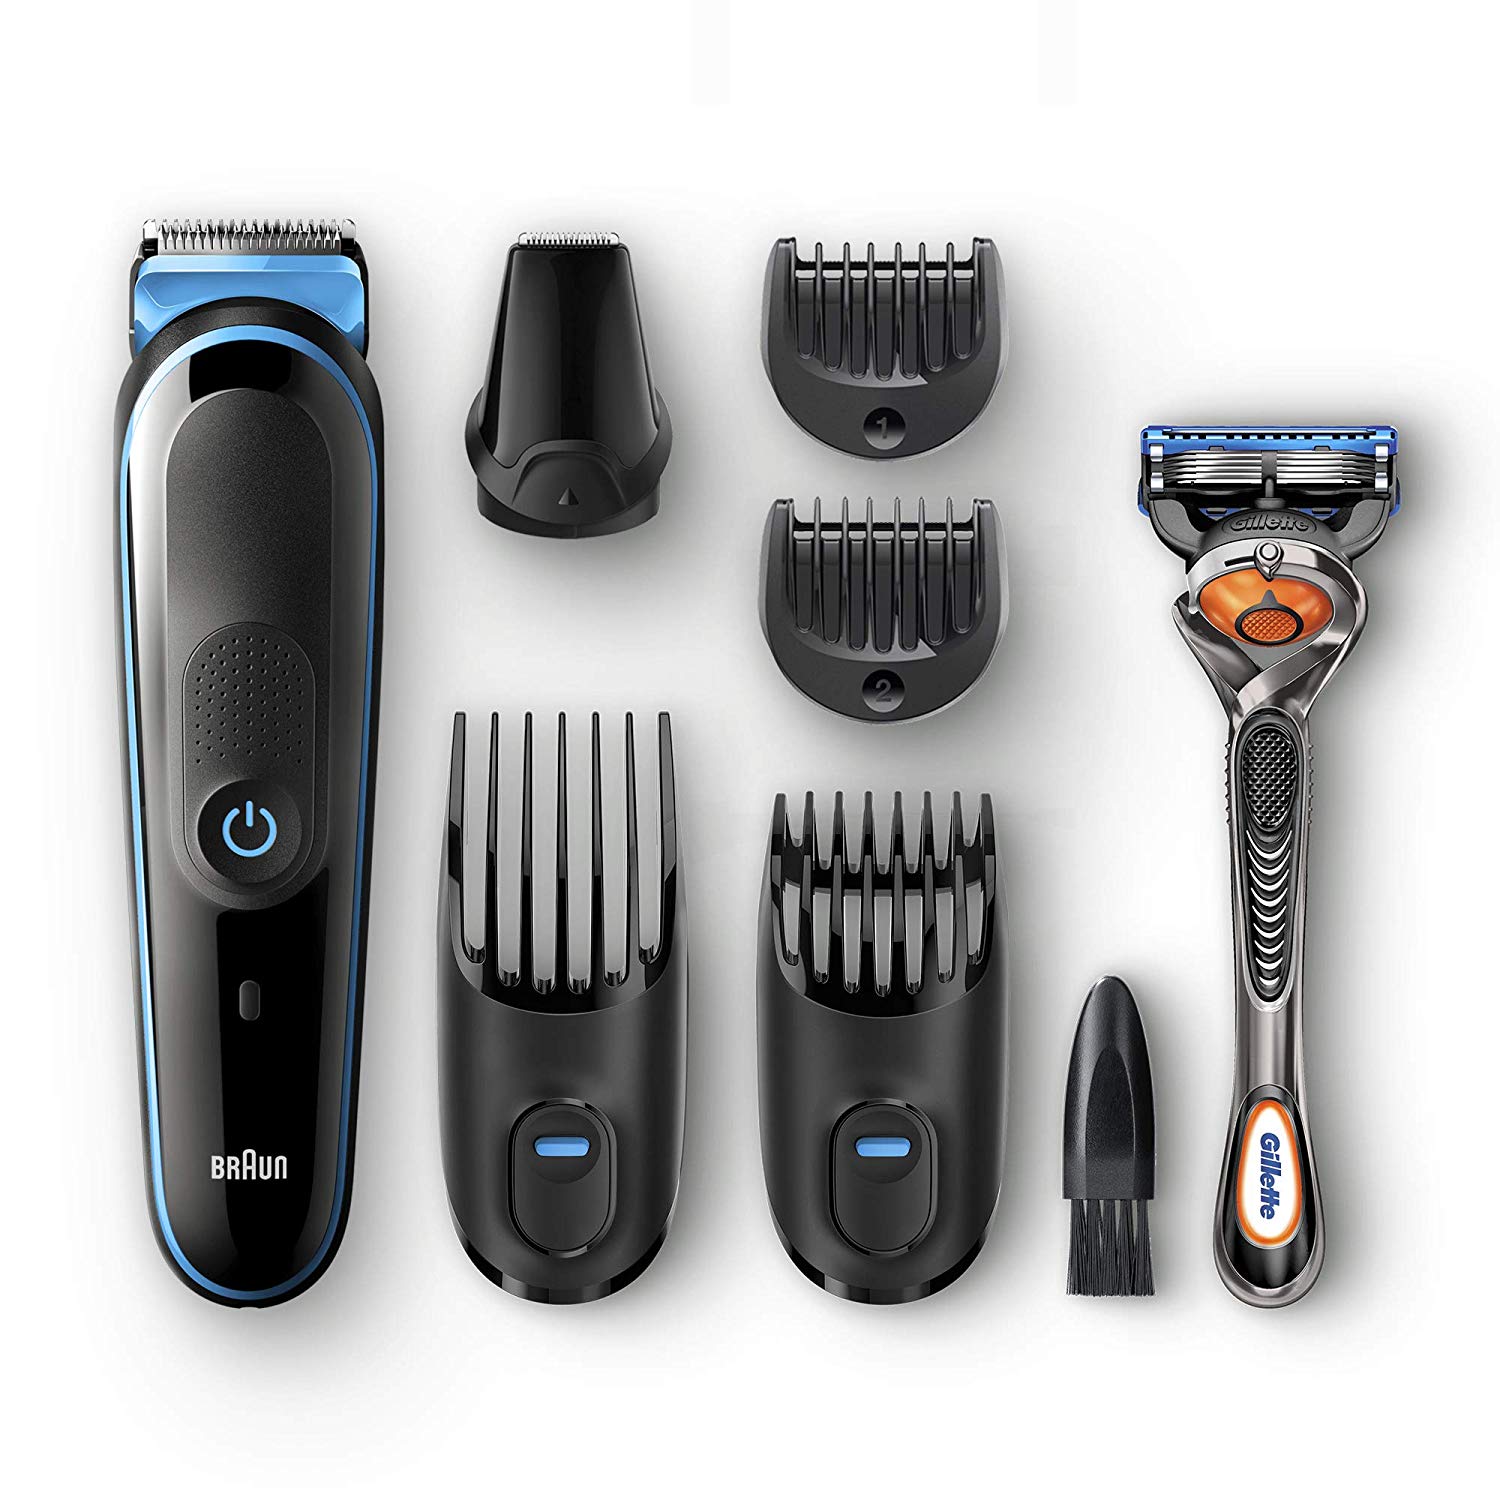 Braun Beard Trimmer Amazon Deal of the Day